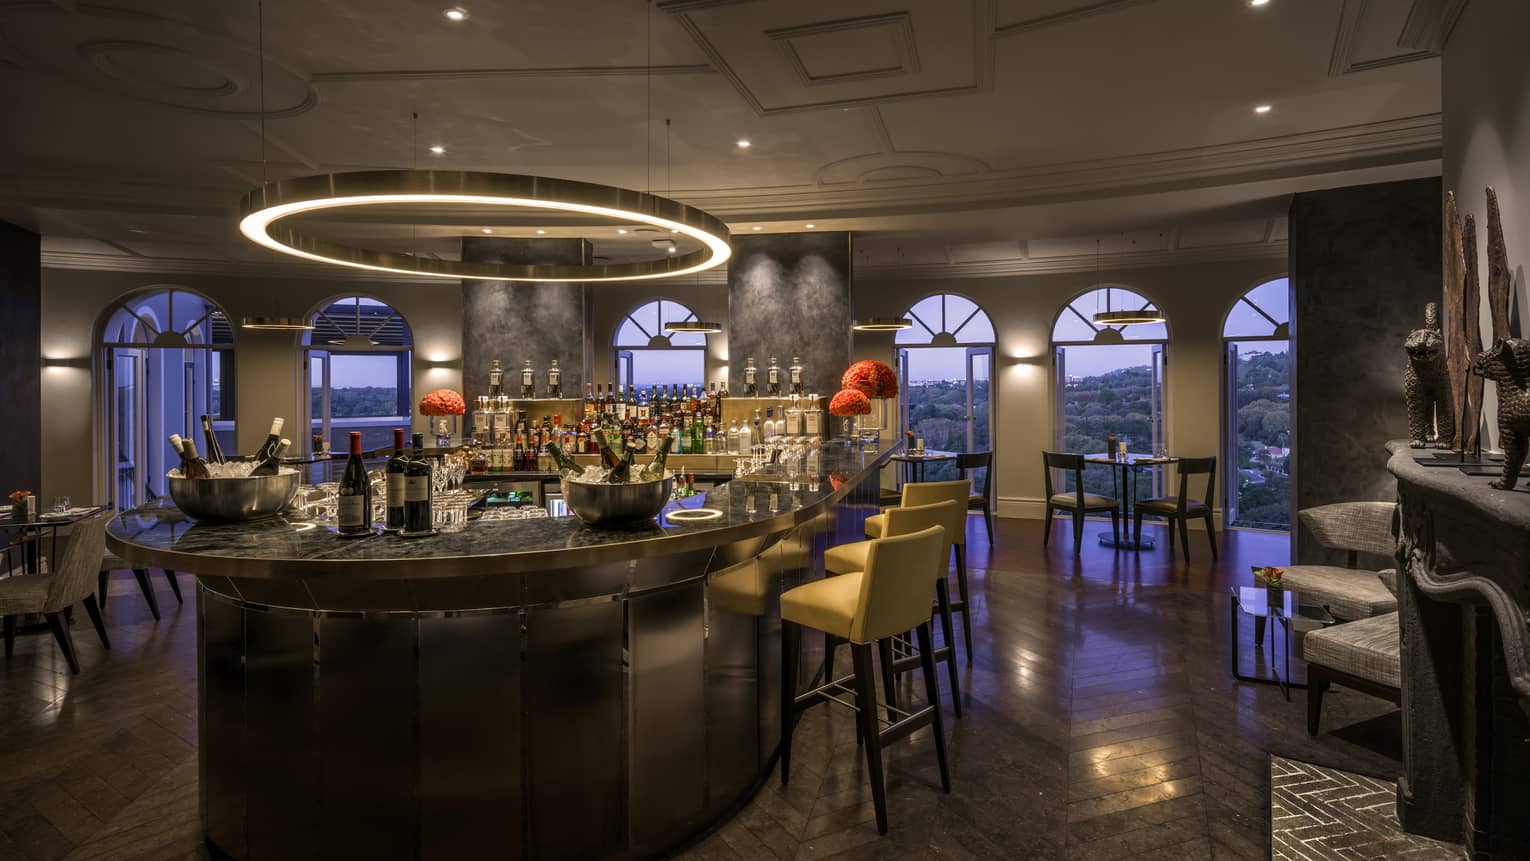 Dimly lit bar with circular overhead light and lounge area with outdoor view